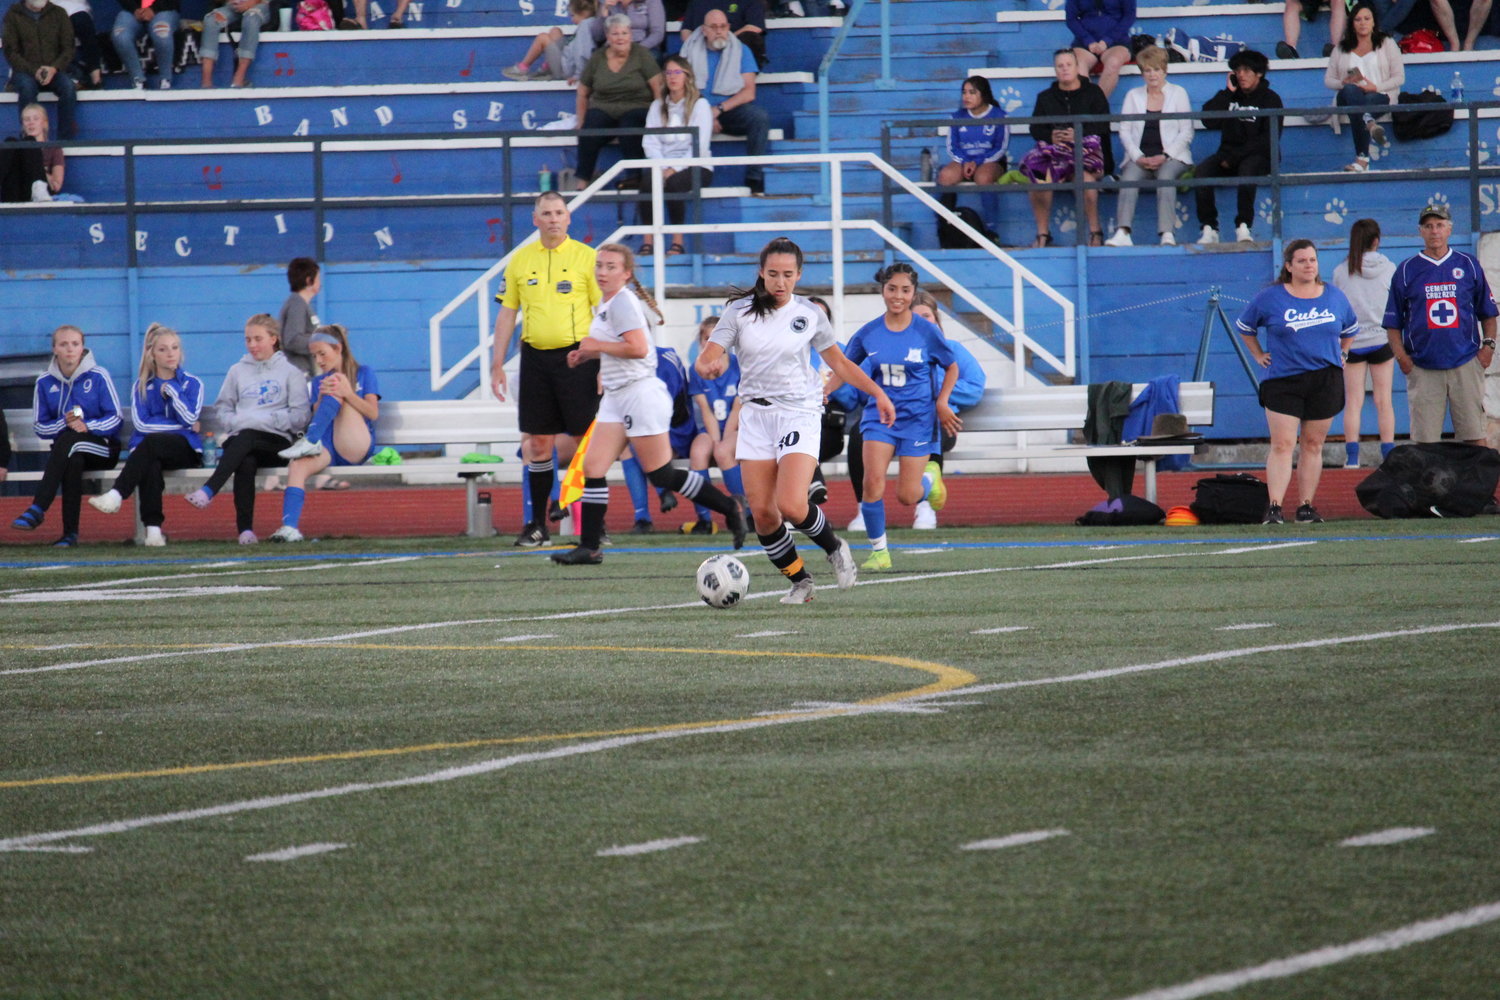 Evellina Yuryev possesses the ball in midfield in the Lady Borderites’ 3-1 loss to Sedro-Woolley September 6.